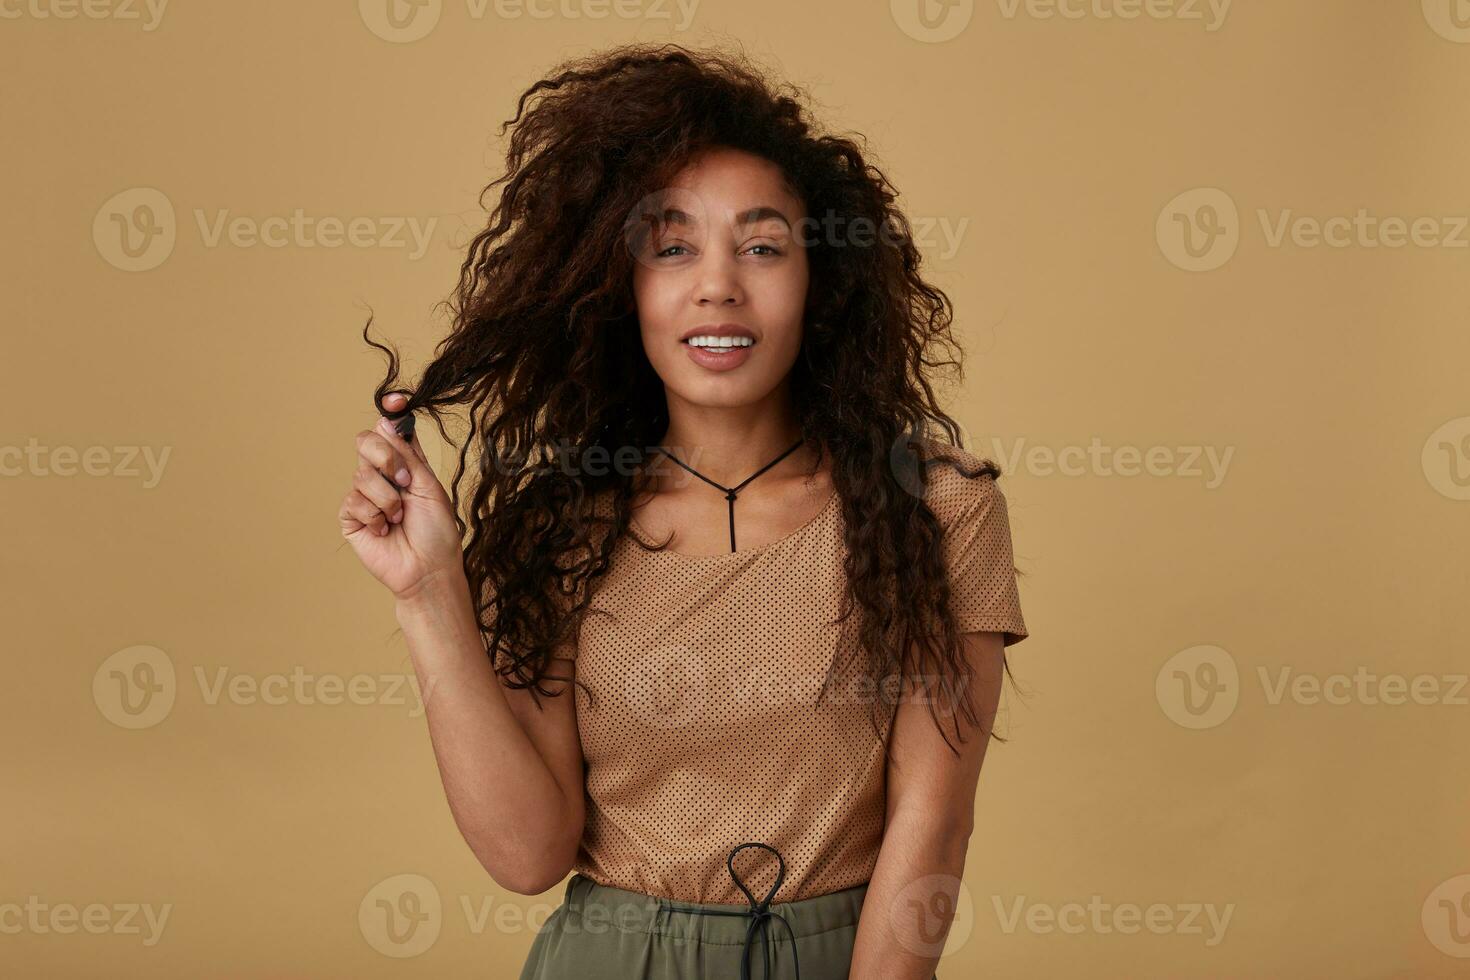 Cheerful young pretty dark skinned lady twisting her brown curly hair on raised finger and smiling gladly at camera while posing over beige background in casual wear photo